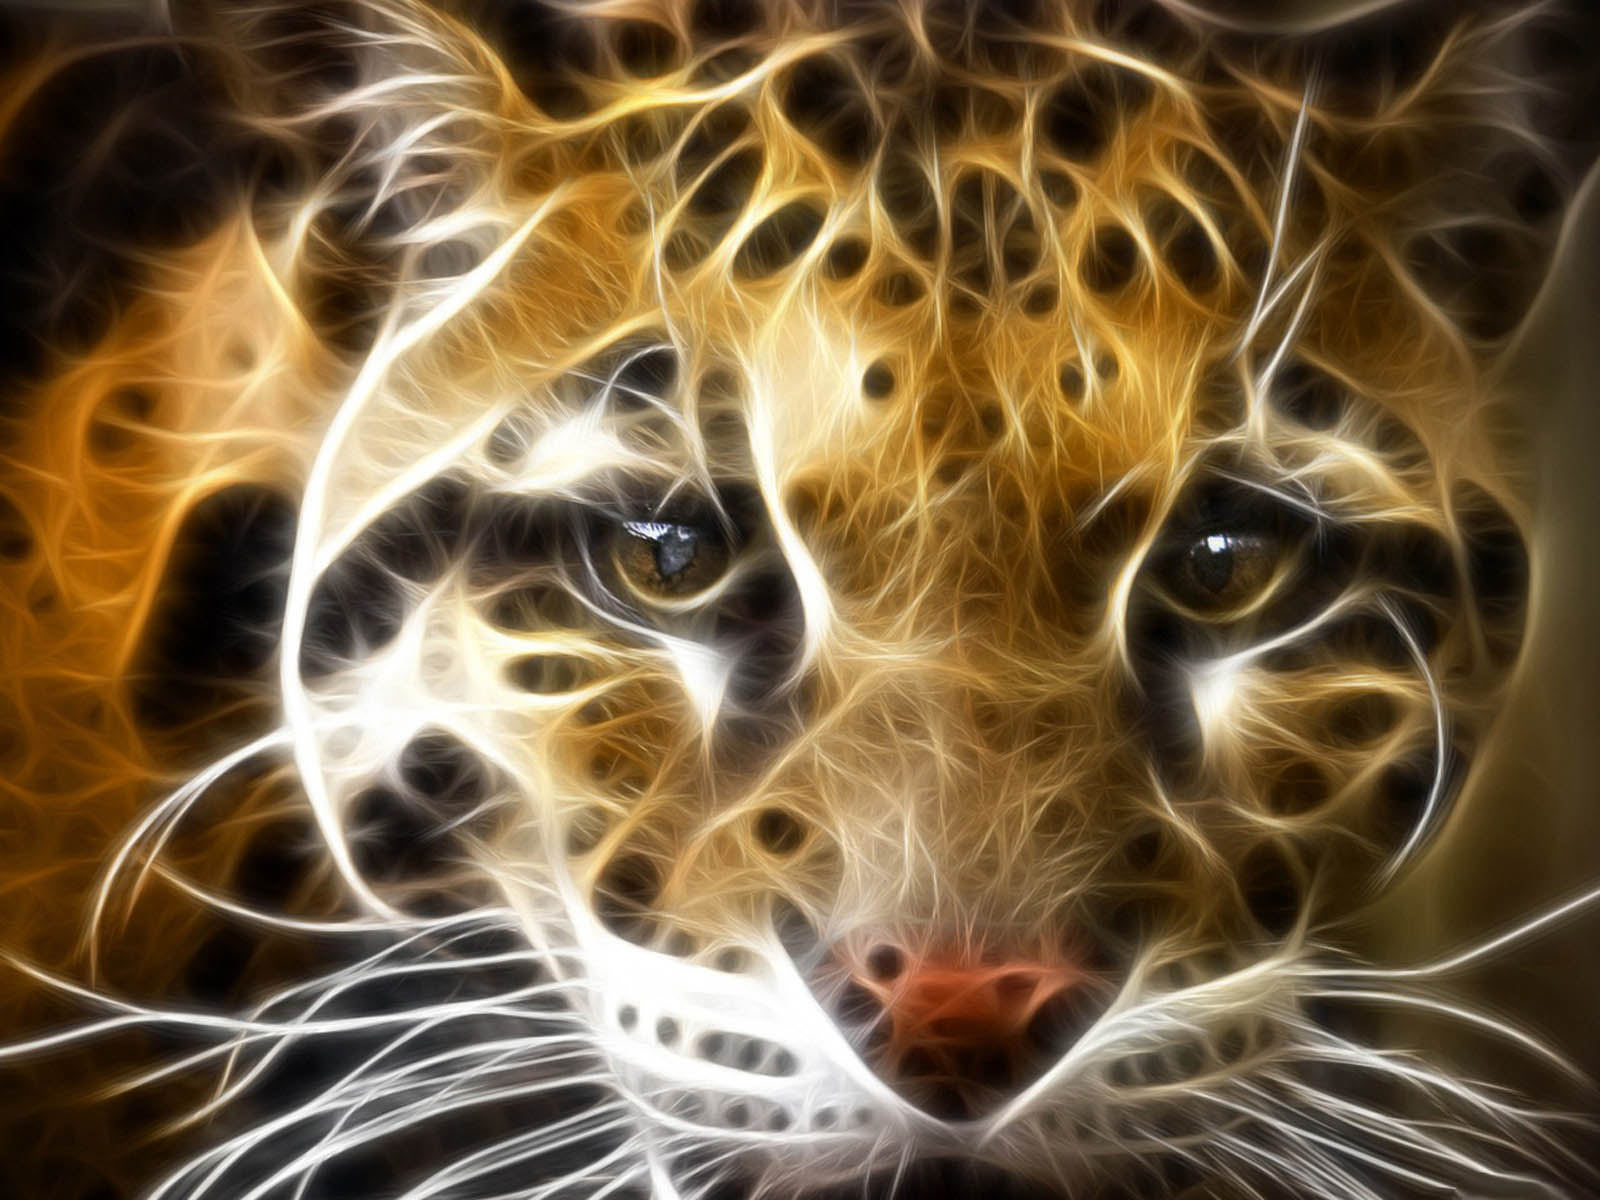 Tag Tiger 3D Wallpapers Images Photos Pictures and Backgrounds for